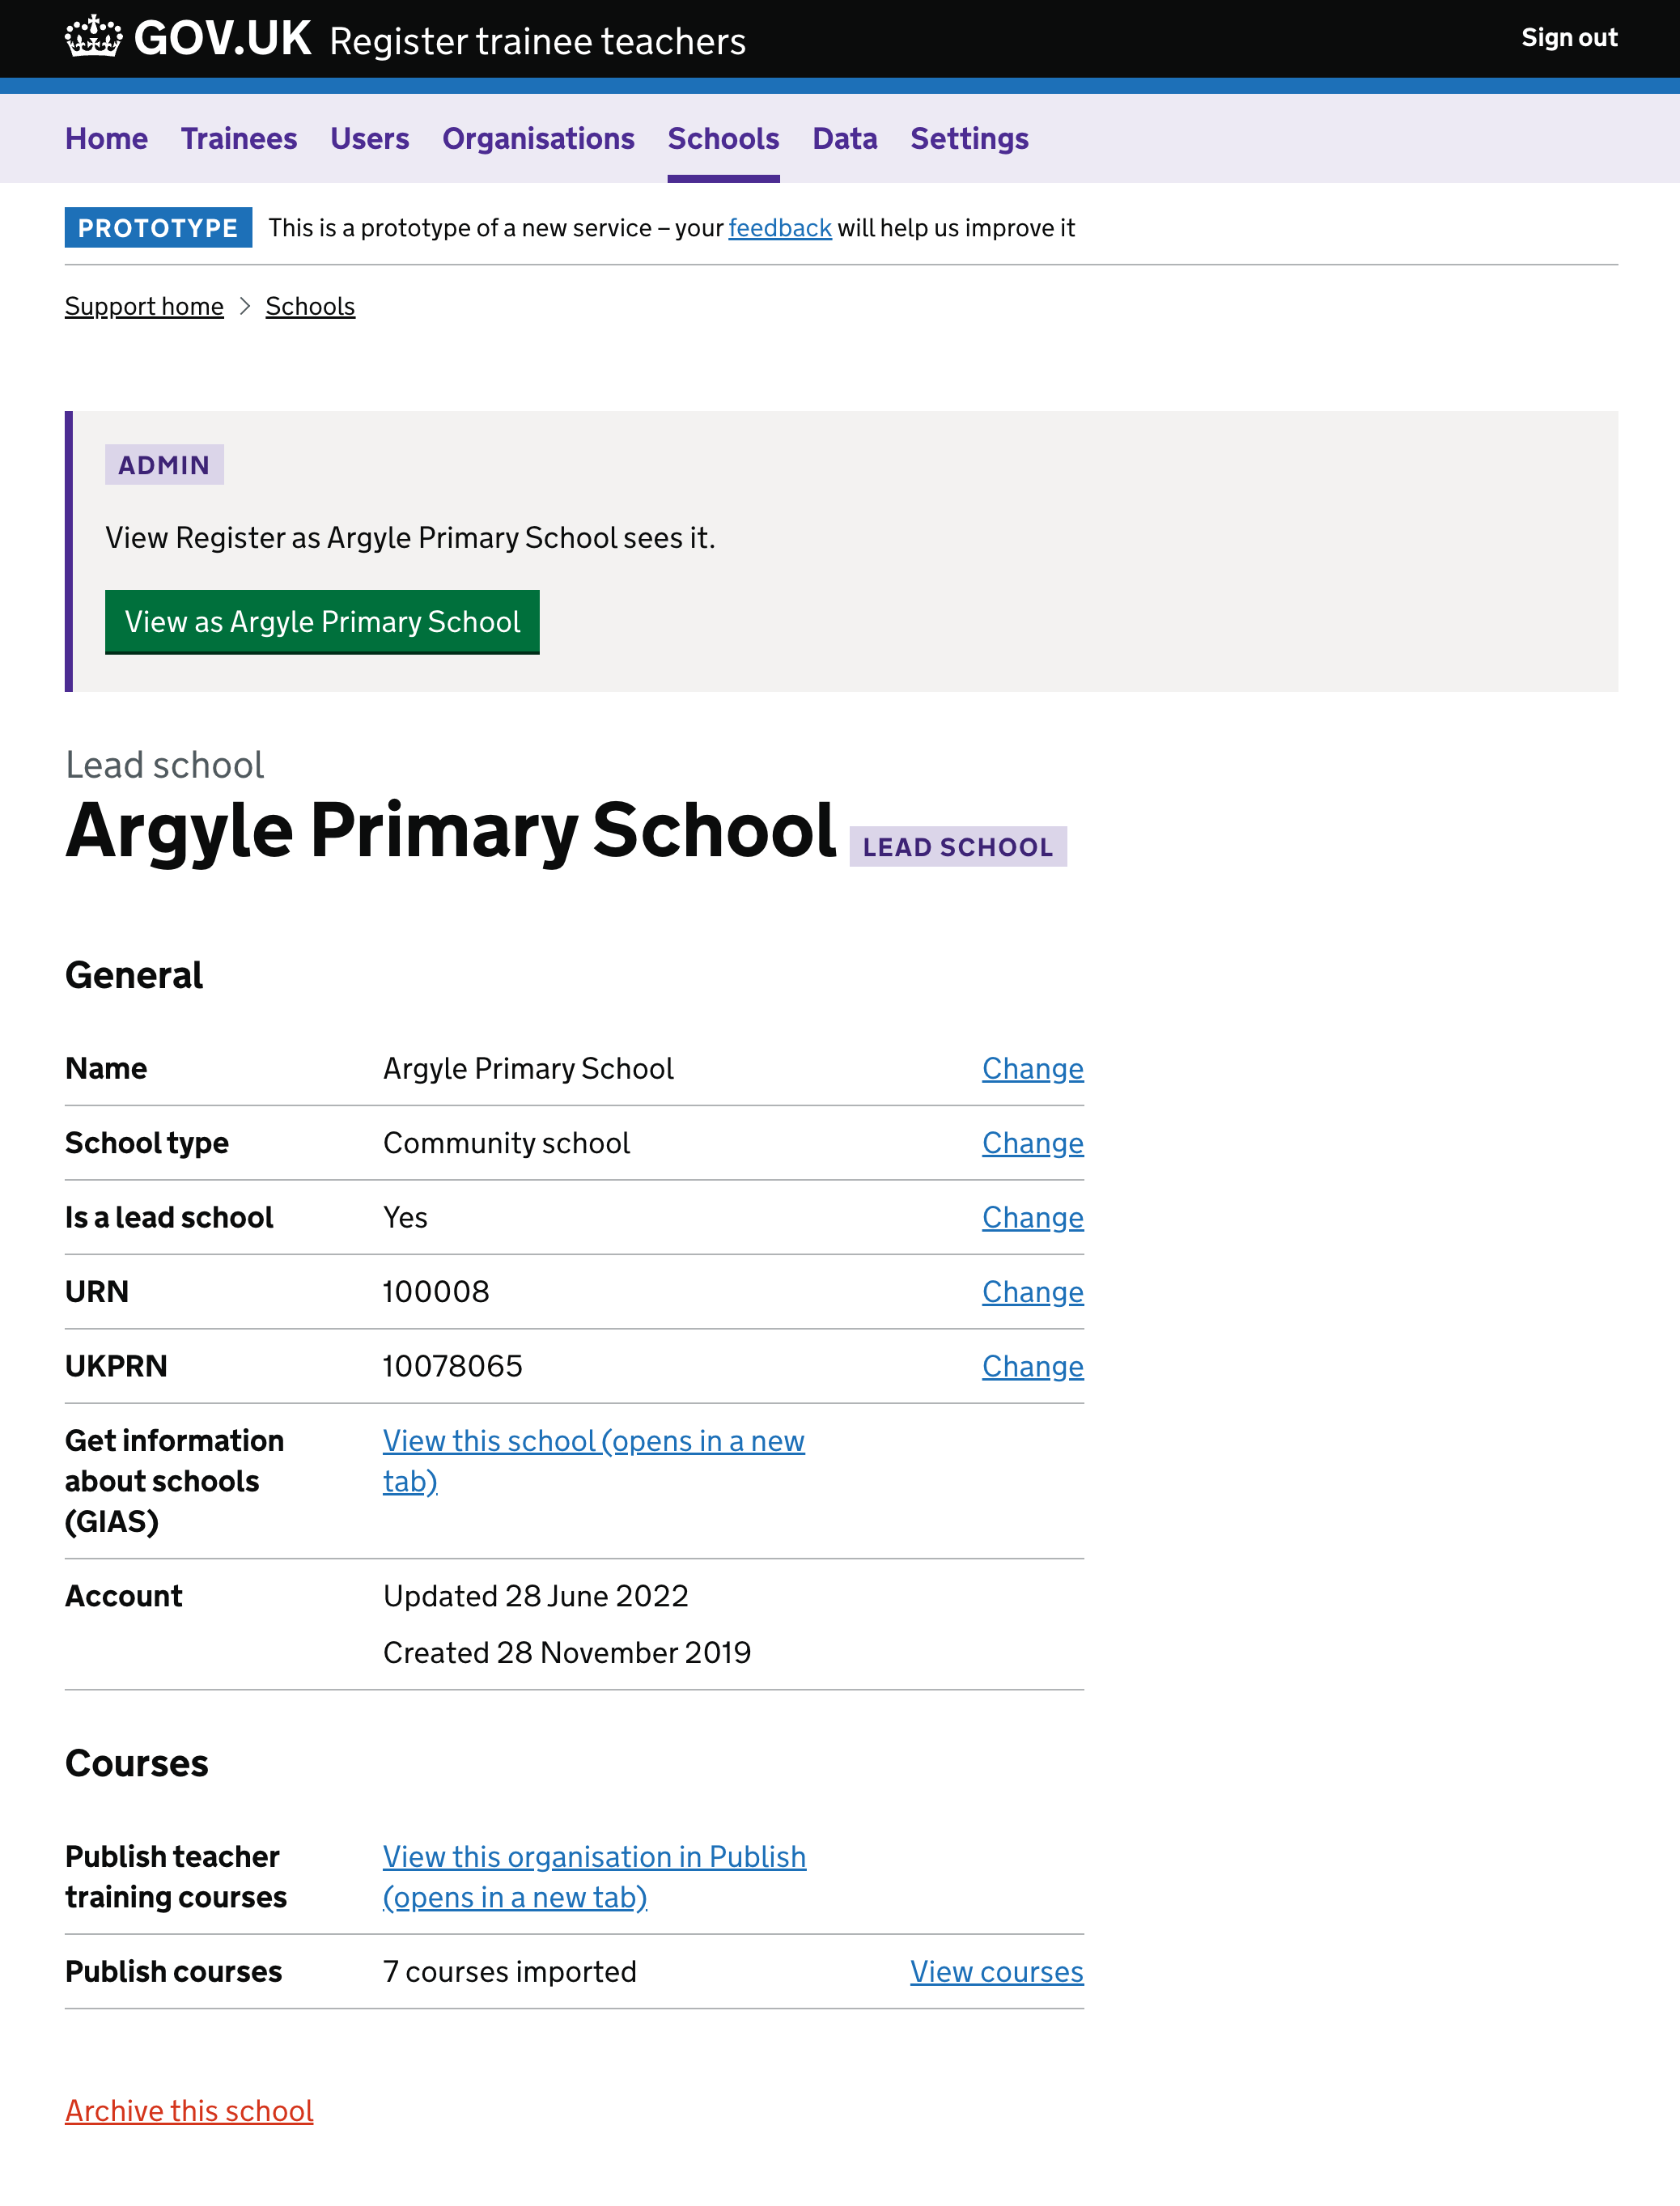 A page for showing information about a school. For lead schools it also shows users with access to that lead school.